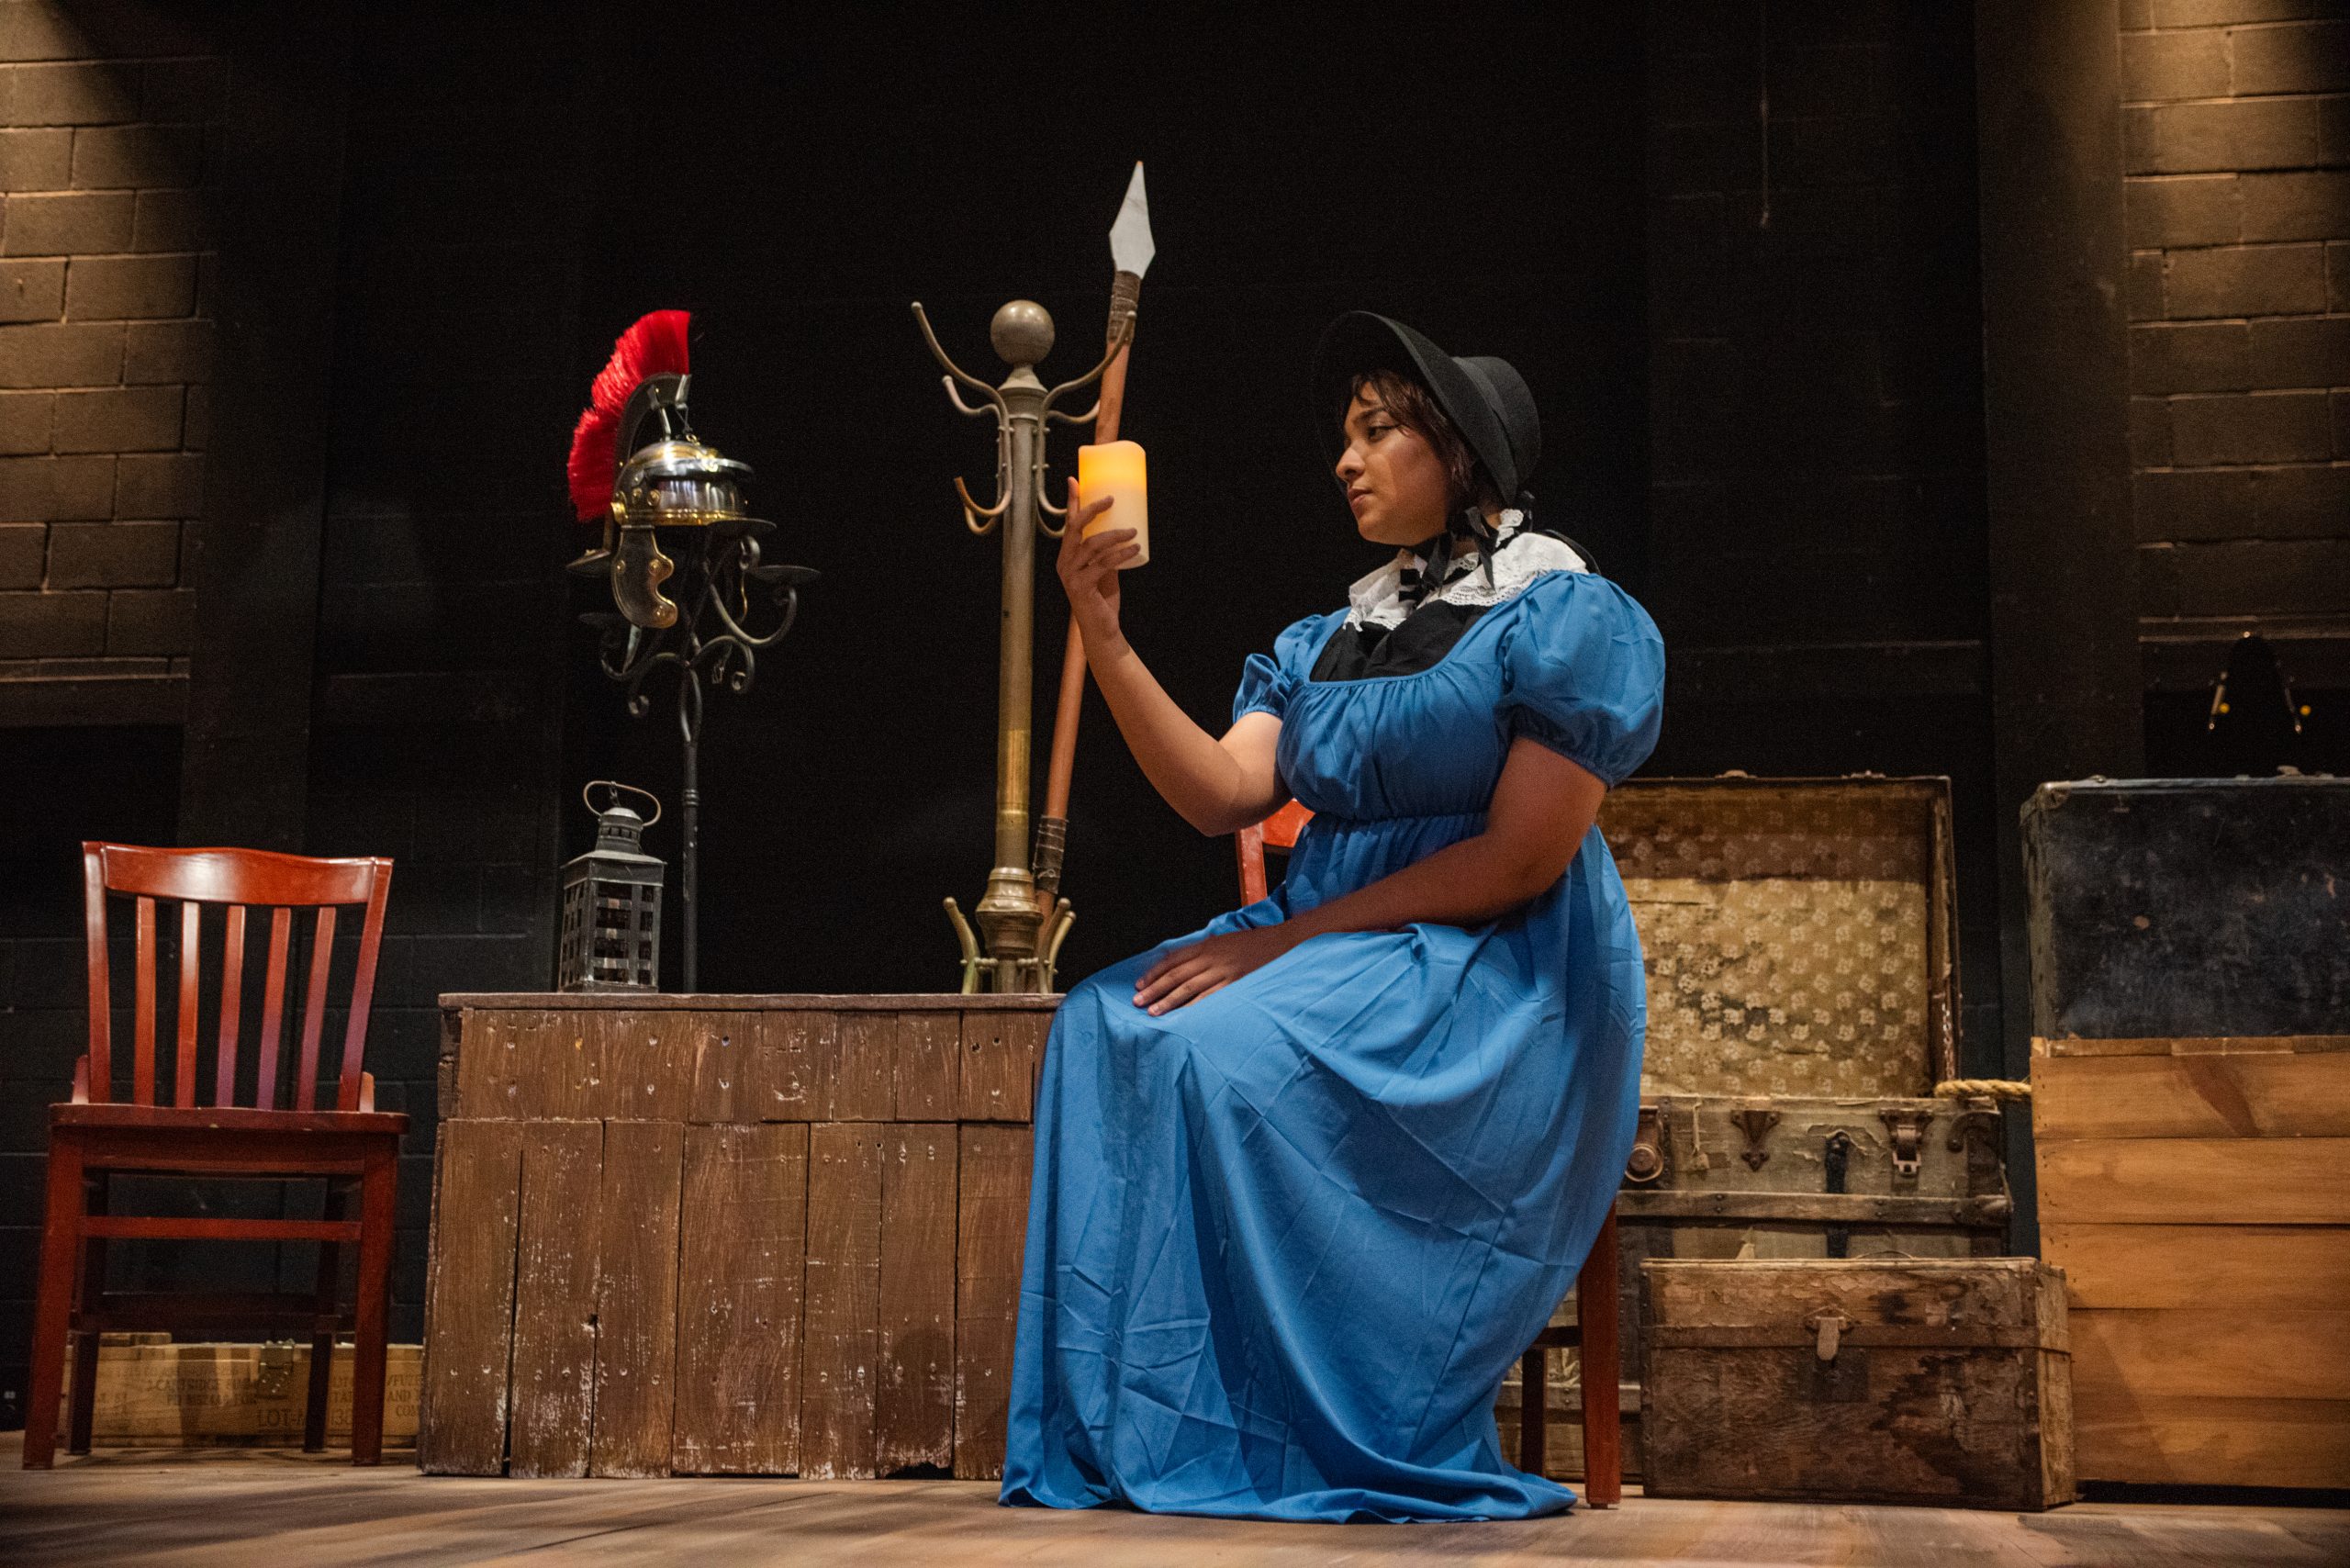 Alex Hoben/The Collegian SE student Isara Al-Hilo poses on-stage with one of the many candles on the set in her costume as the Reverend’s Wife. Al-Hilo plays five parts in the play.